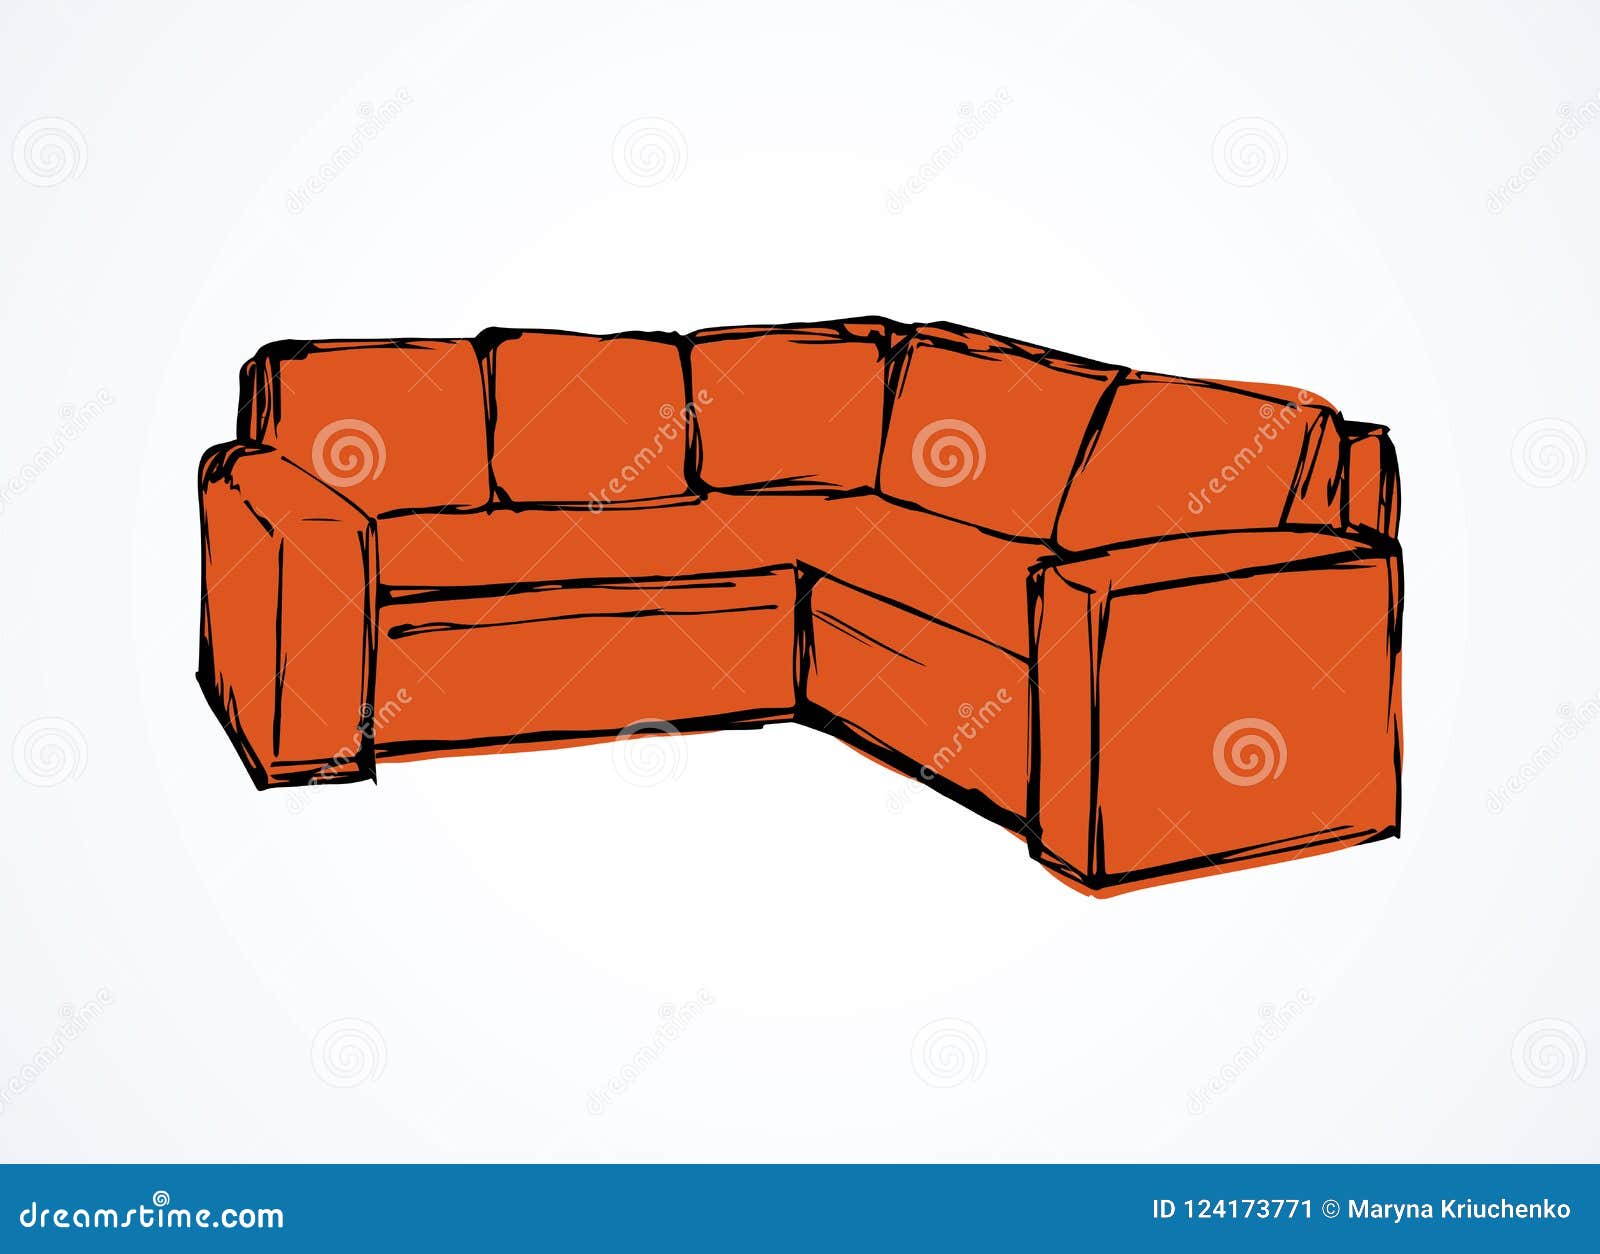 Sketch Items Home Graphic Drawing Furniture Stock Vector (Royalty Free)  723076024